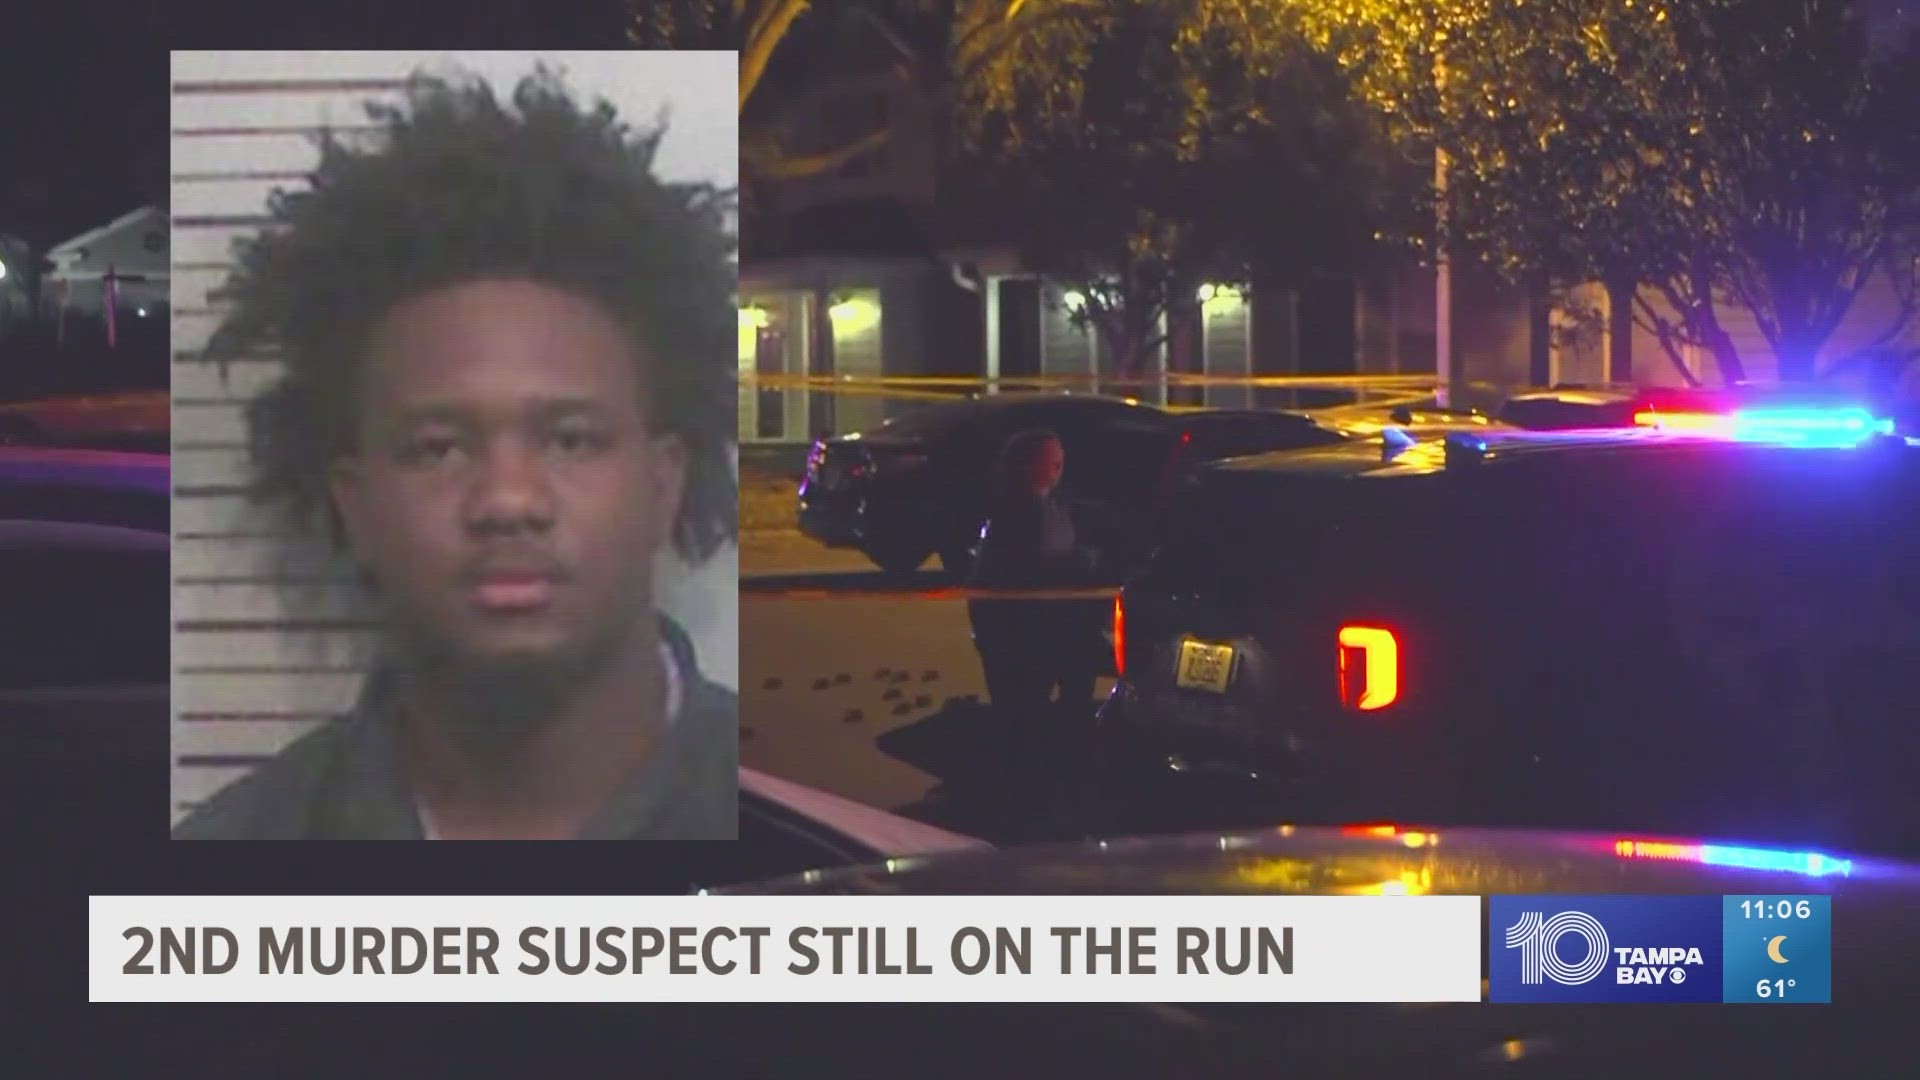 Authorities have been searching for Kevarius Green since the March 11 shooting that left two people dead, including 3-year-old Jaquez Norton.